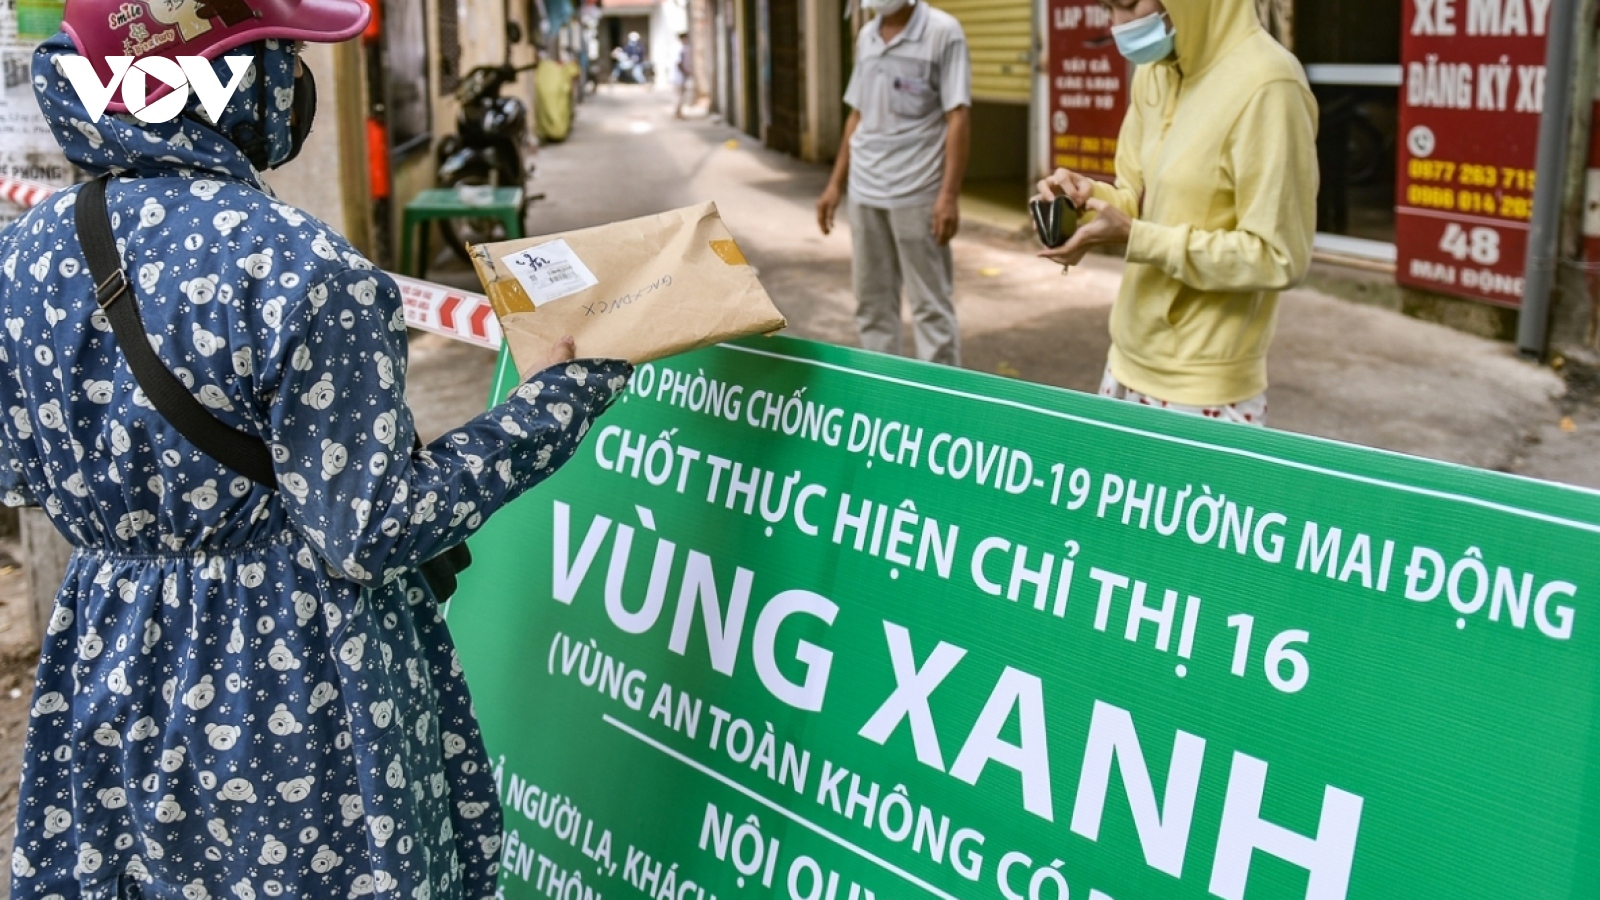 Hanoi remains at high risk of COVID-19 community infection 